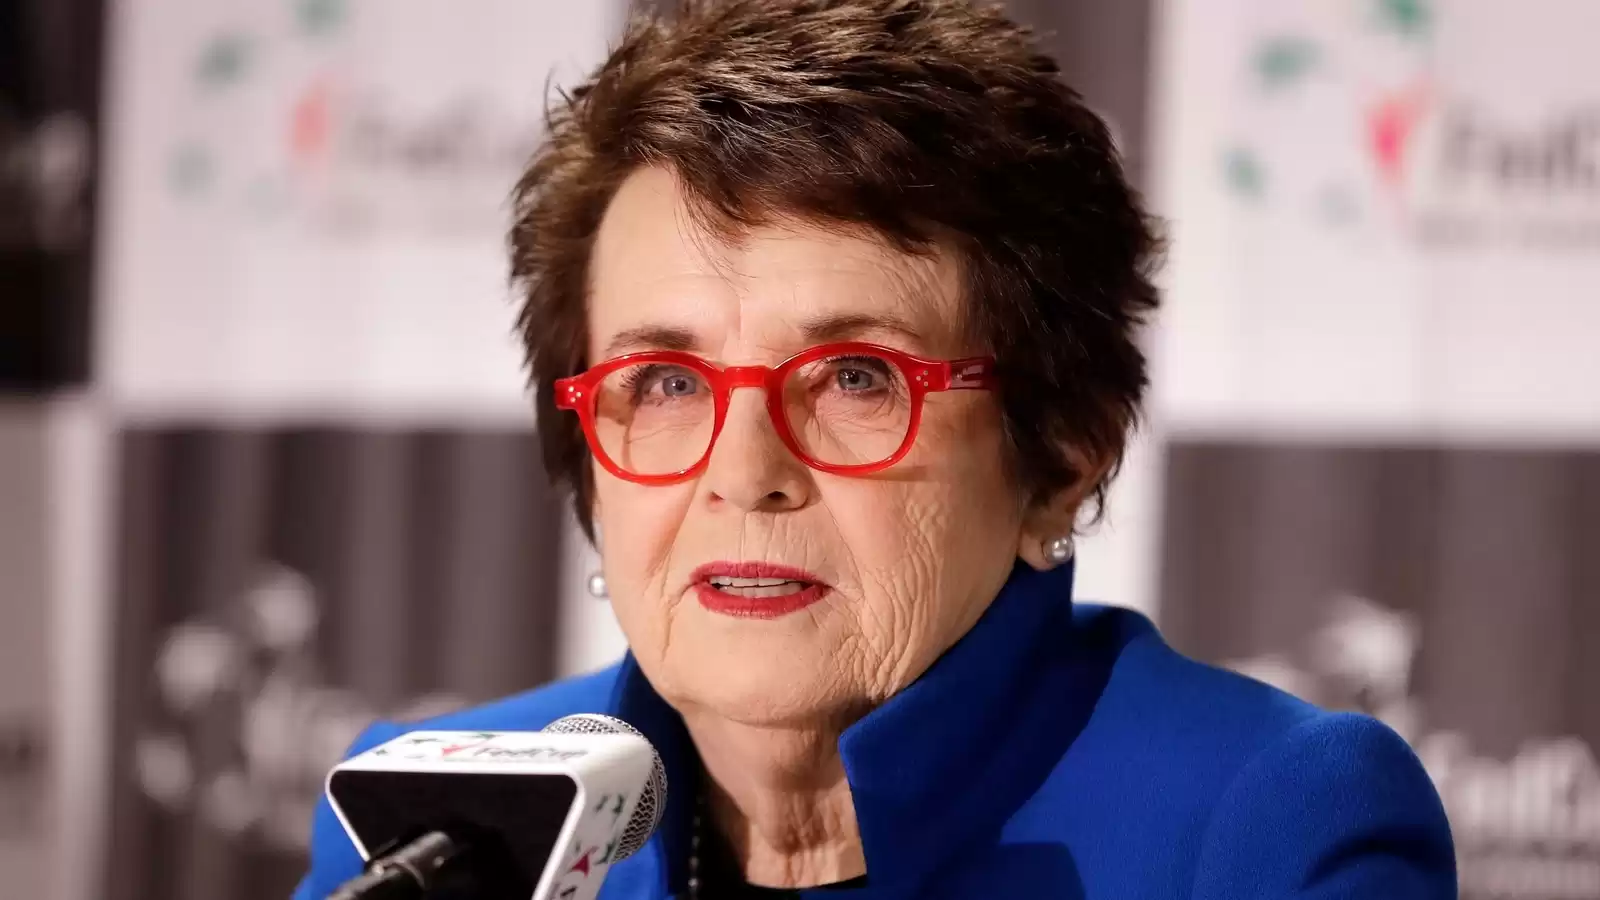 Billie Jean King's equal prize money advocacy at 1973 US Open to be celebrated